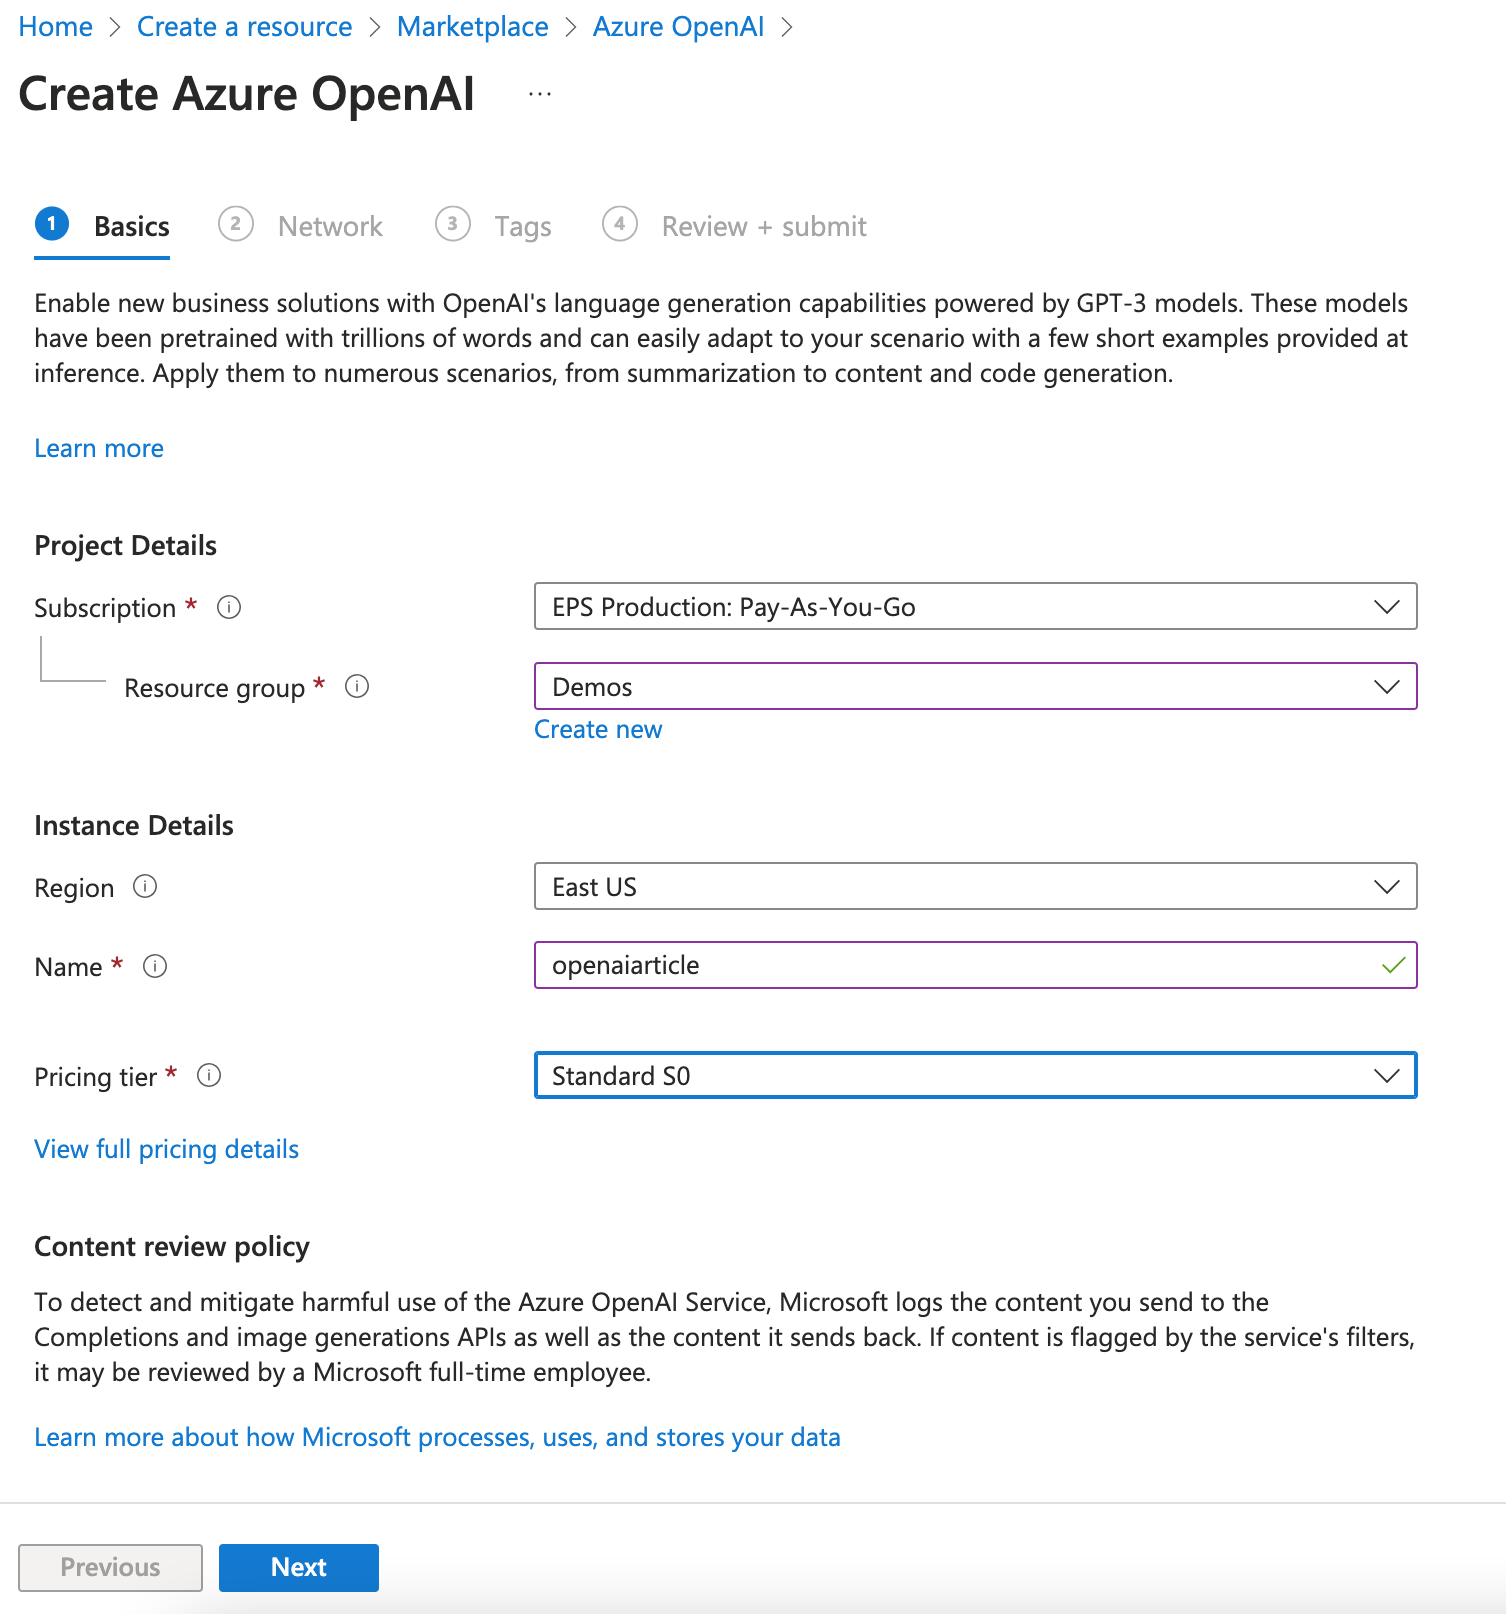 Figure 1: Creating an Azure OpenAI resource is very similar to creating many other Azure services.